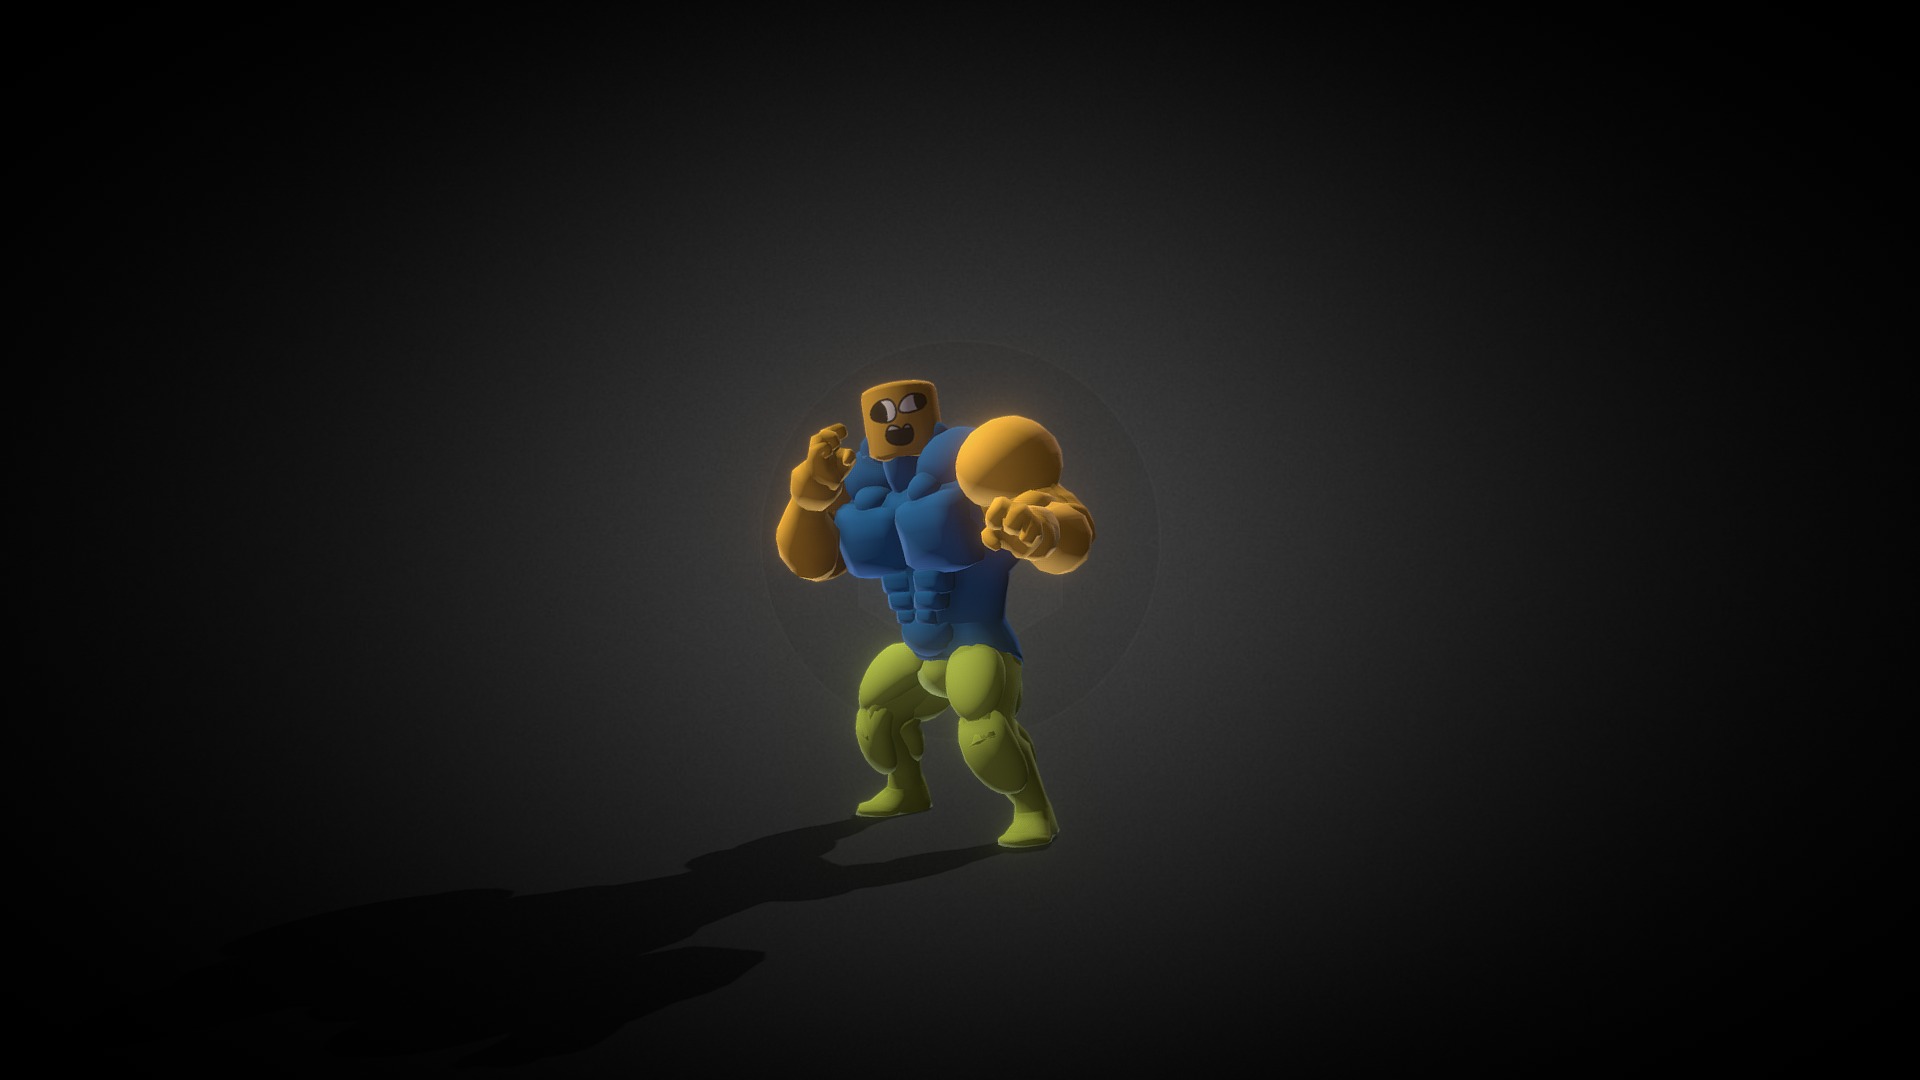 Noob Roblox Download Free 3d Model By Mortaleiros Mortaleiros 4665575 - 3.0 noob roblox